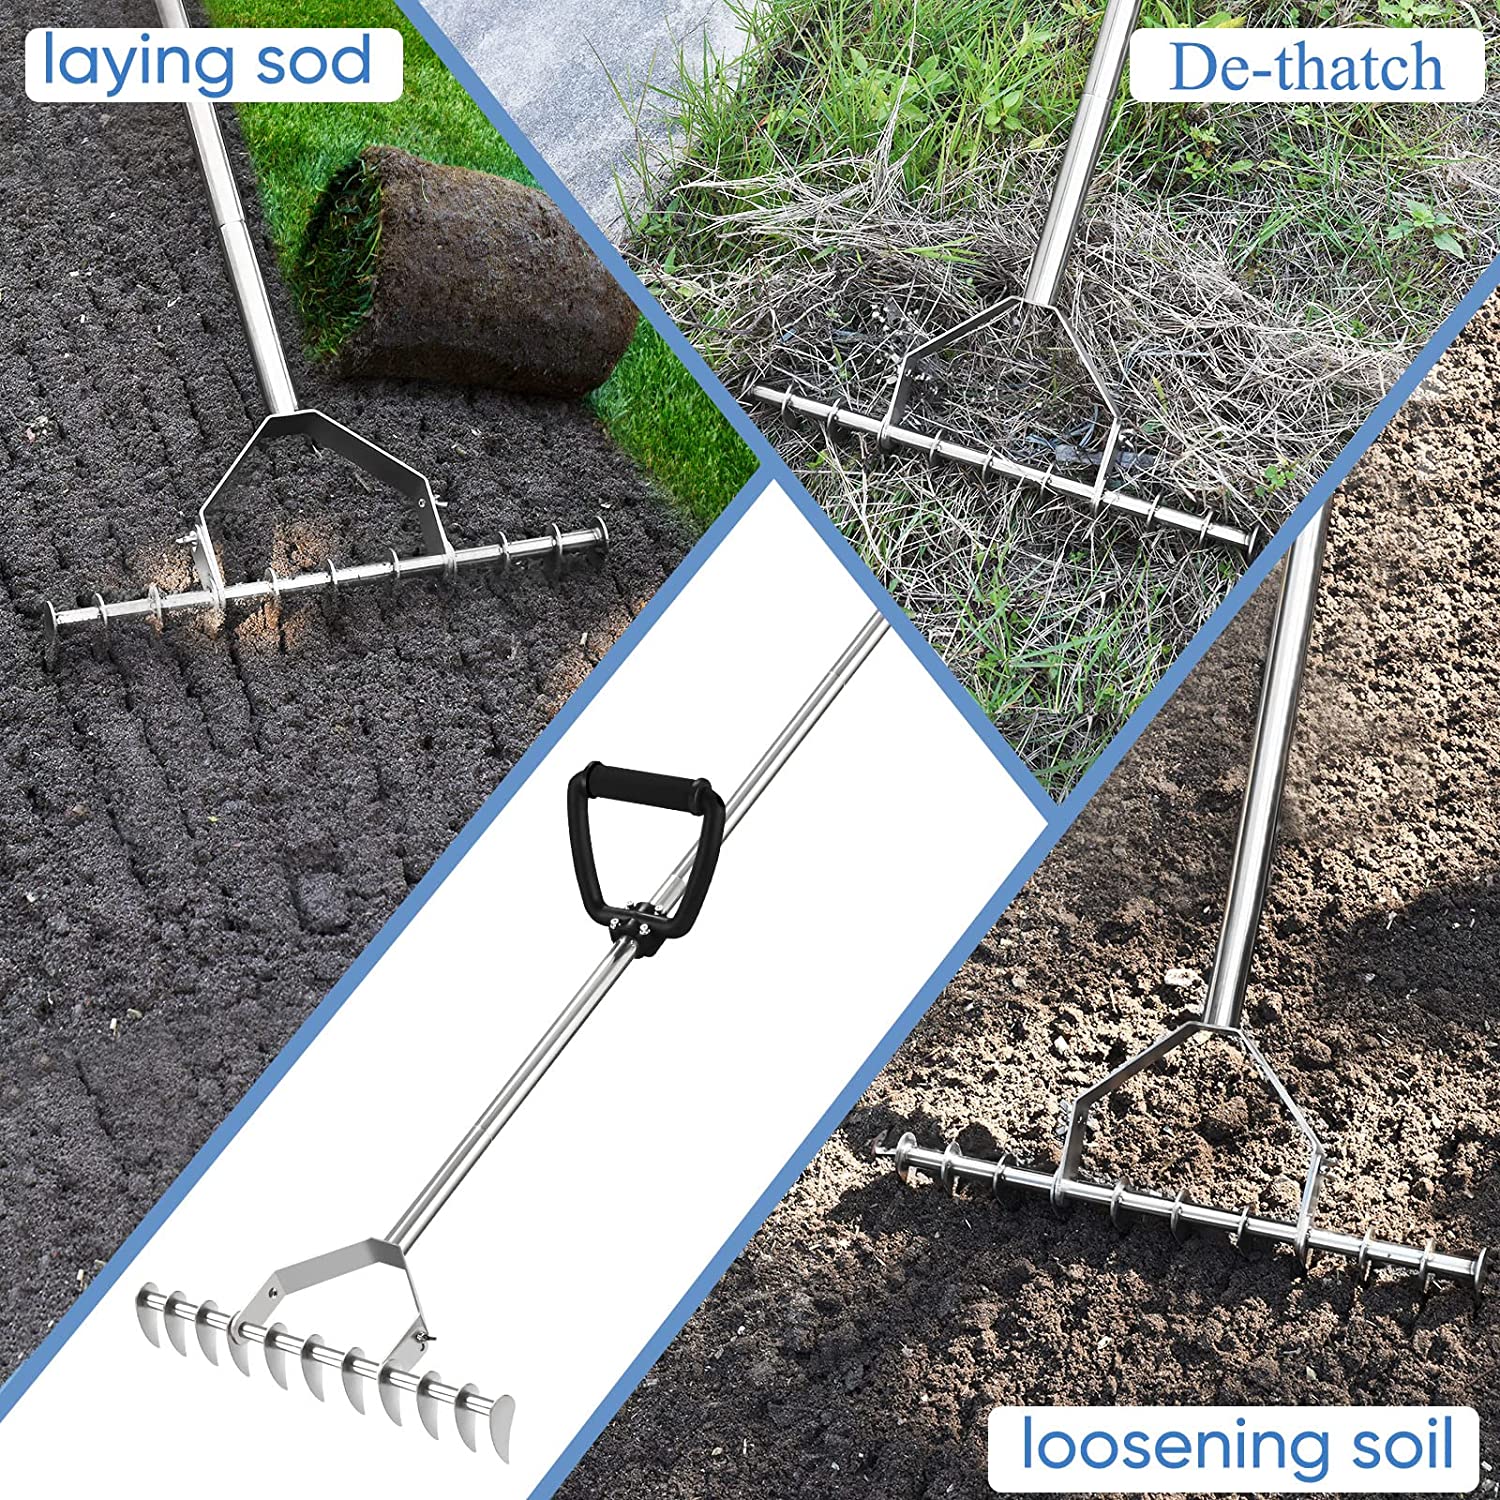 DACK 64" Thatch Rake,Dethatcher Lawn Rake with Back-Saving Handle,Curved Steel Tines for Cleaning Dead Grass,Fertilizing Reseeding Cultivator on Small Yard Garden Made of Stainless Steel with Gloves